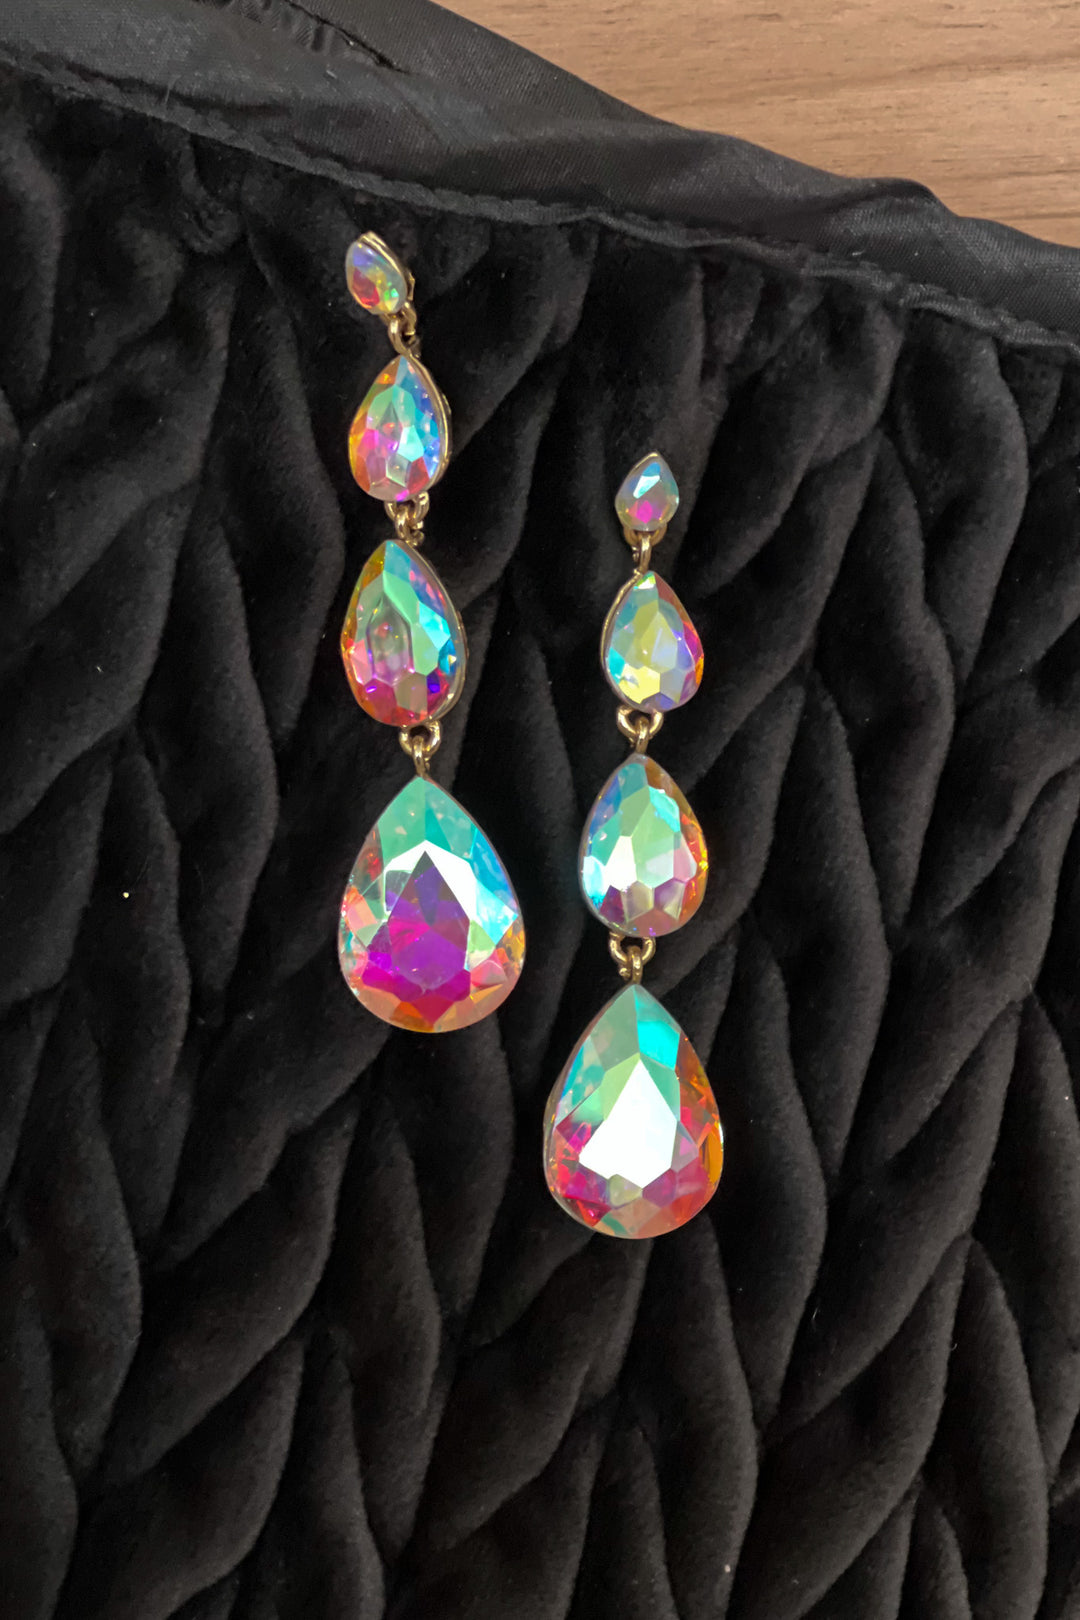 Love at First Sight Iridescent Earrings - ShopSpoiled